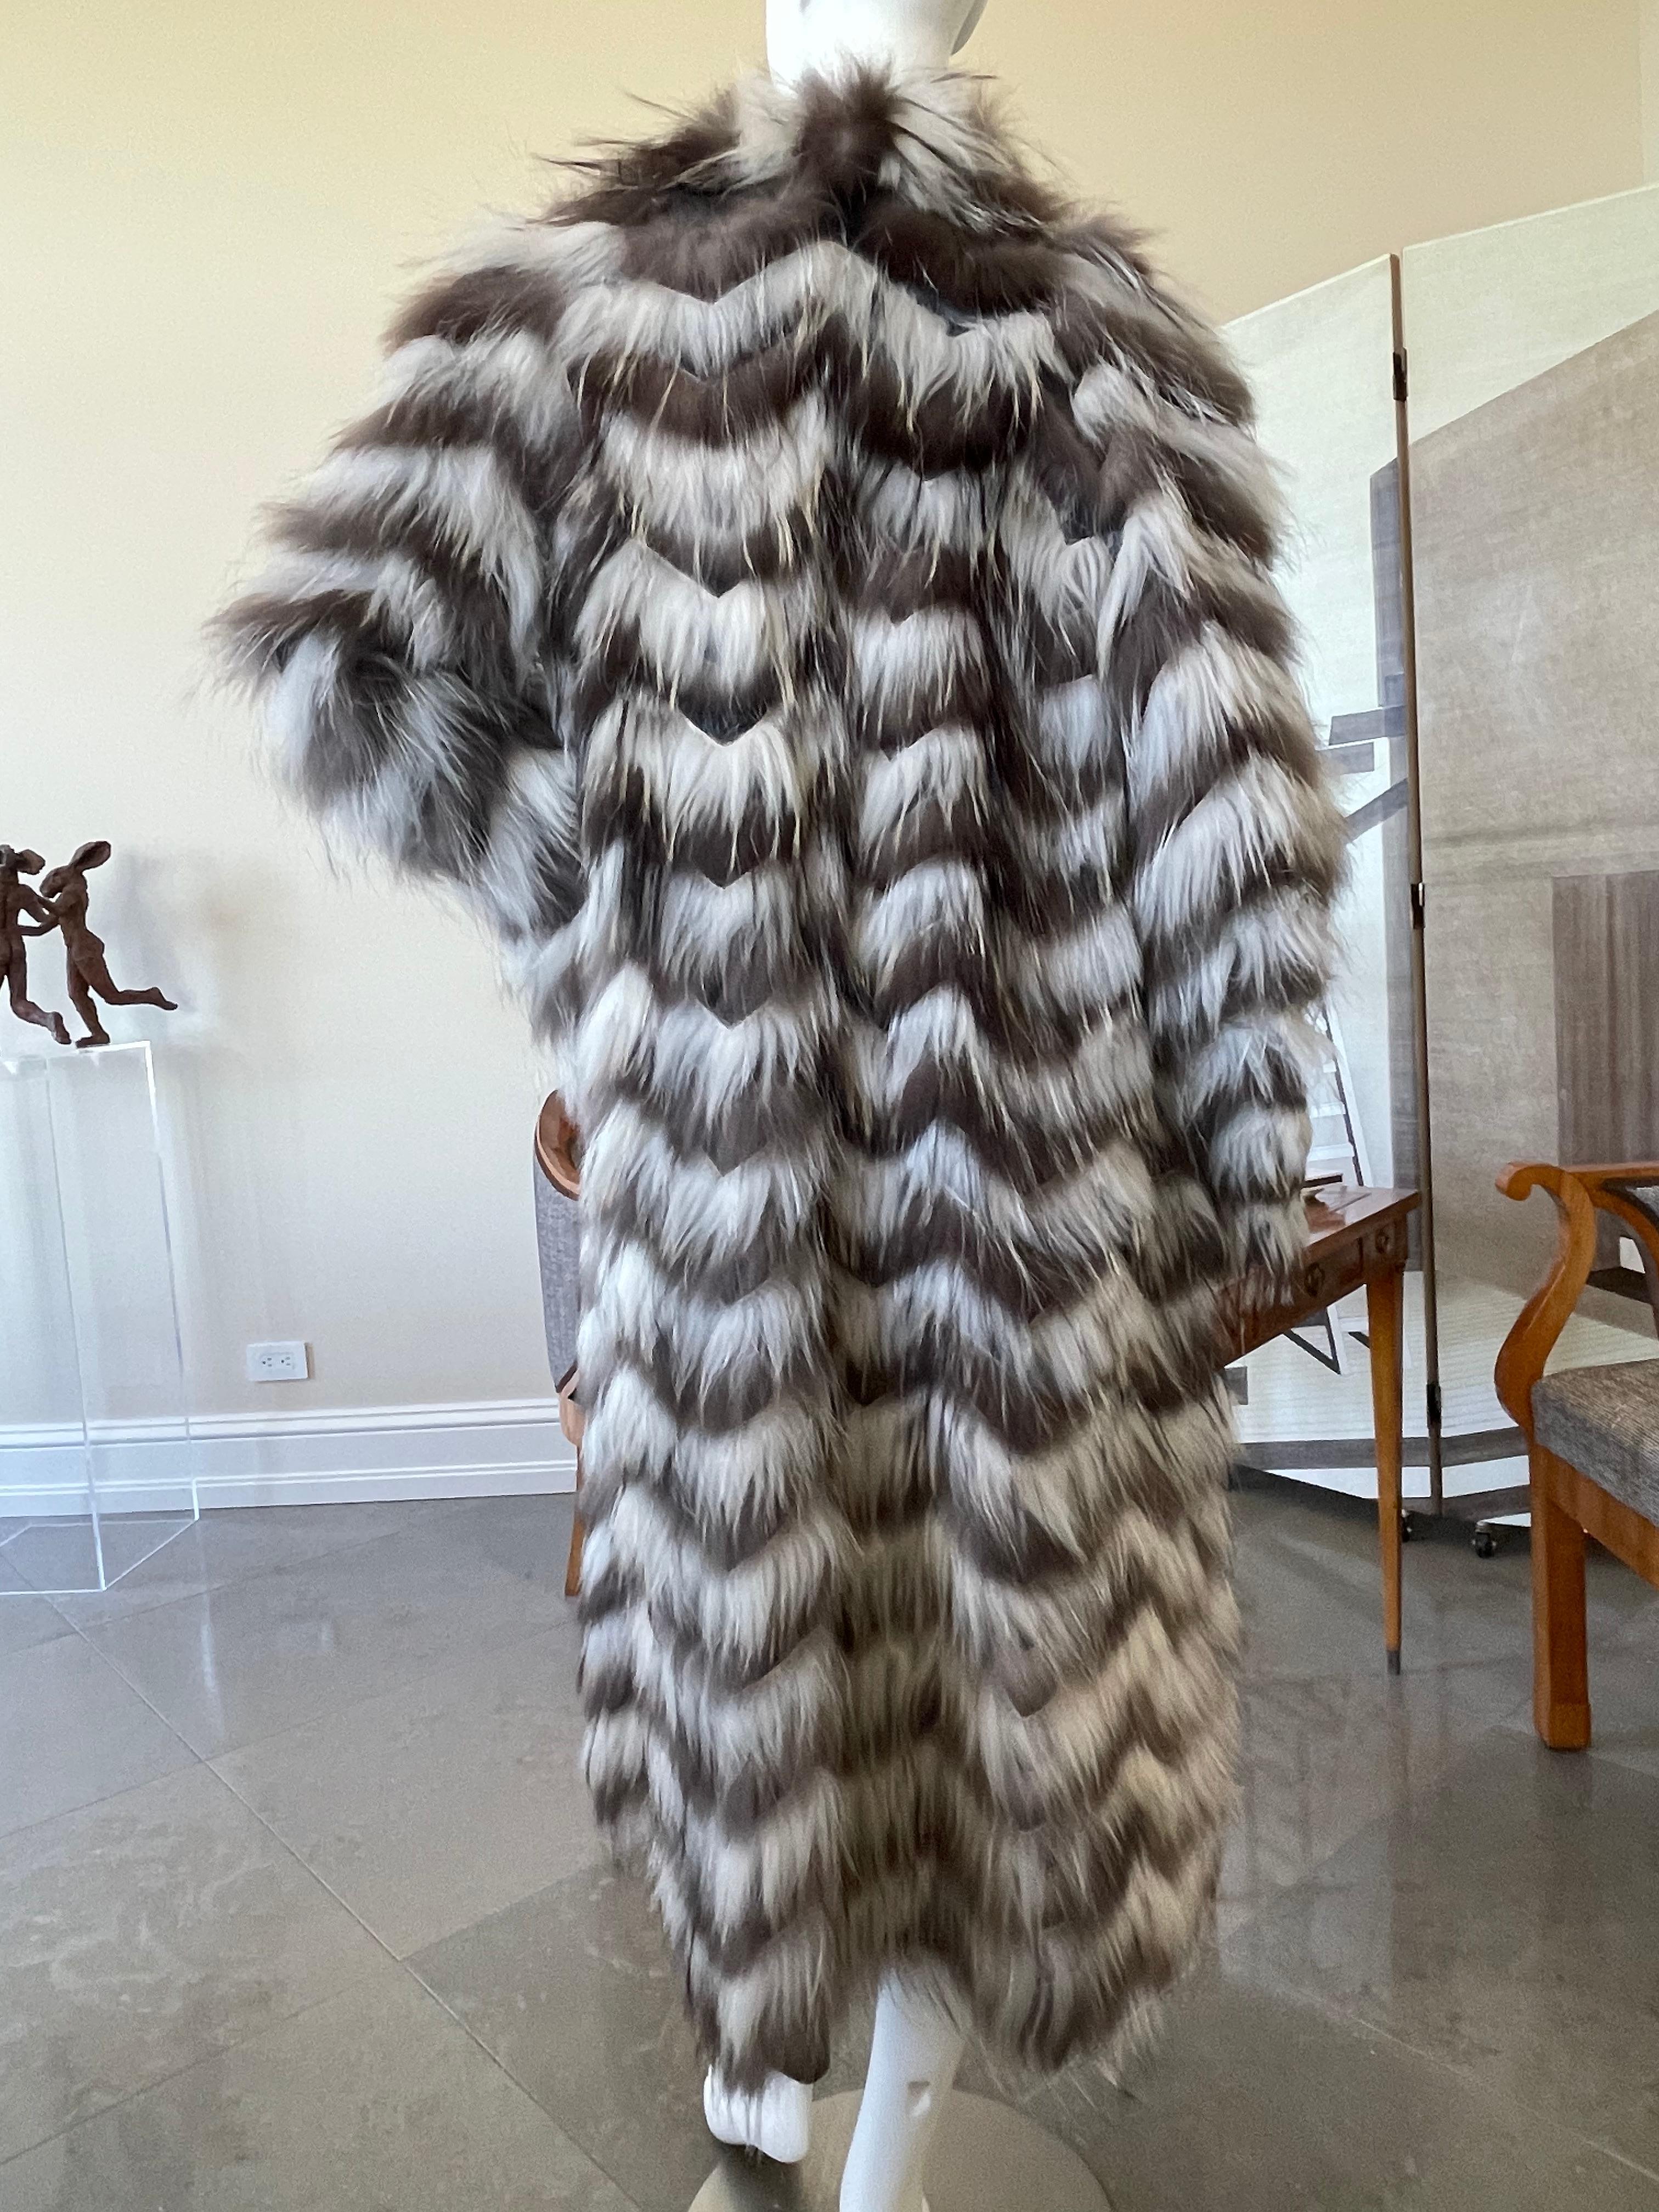 Lanvin Vintage Chevron Pattern Lightweight Feathered Fox Fur Coat  In Good Condition For Sale In Cloverdale, CA